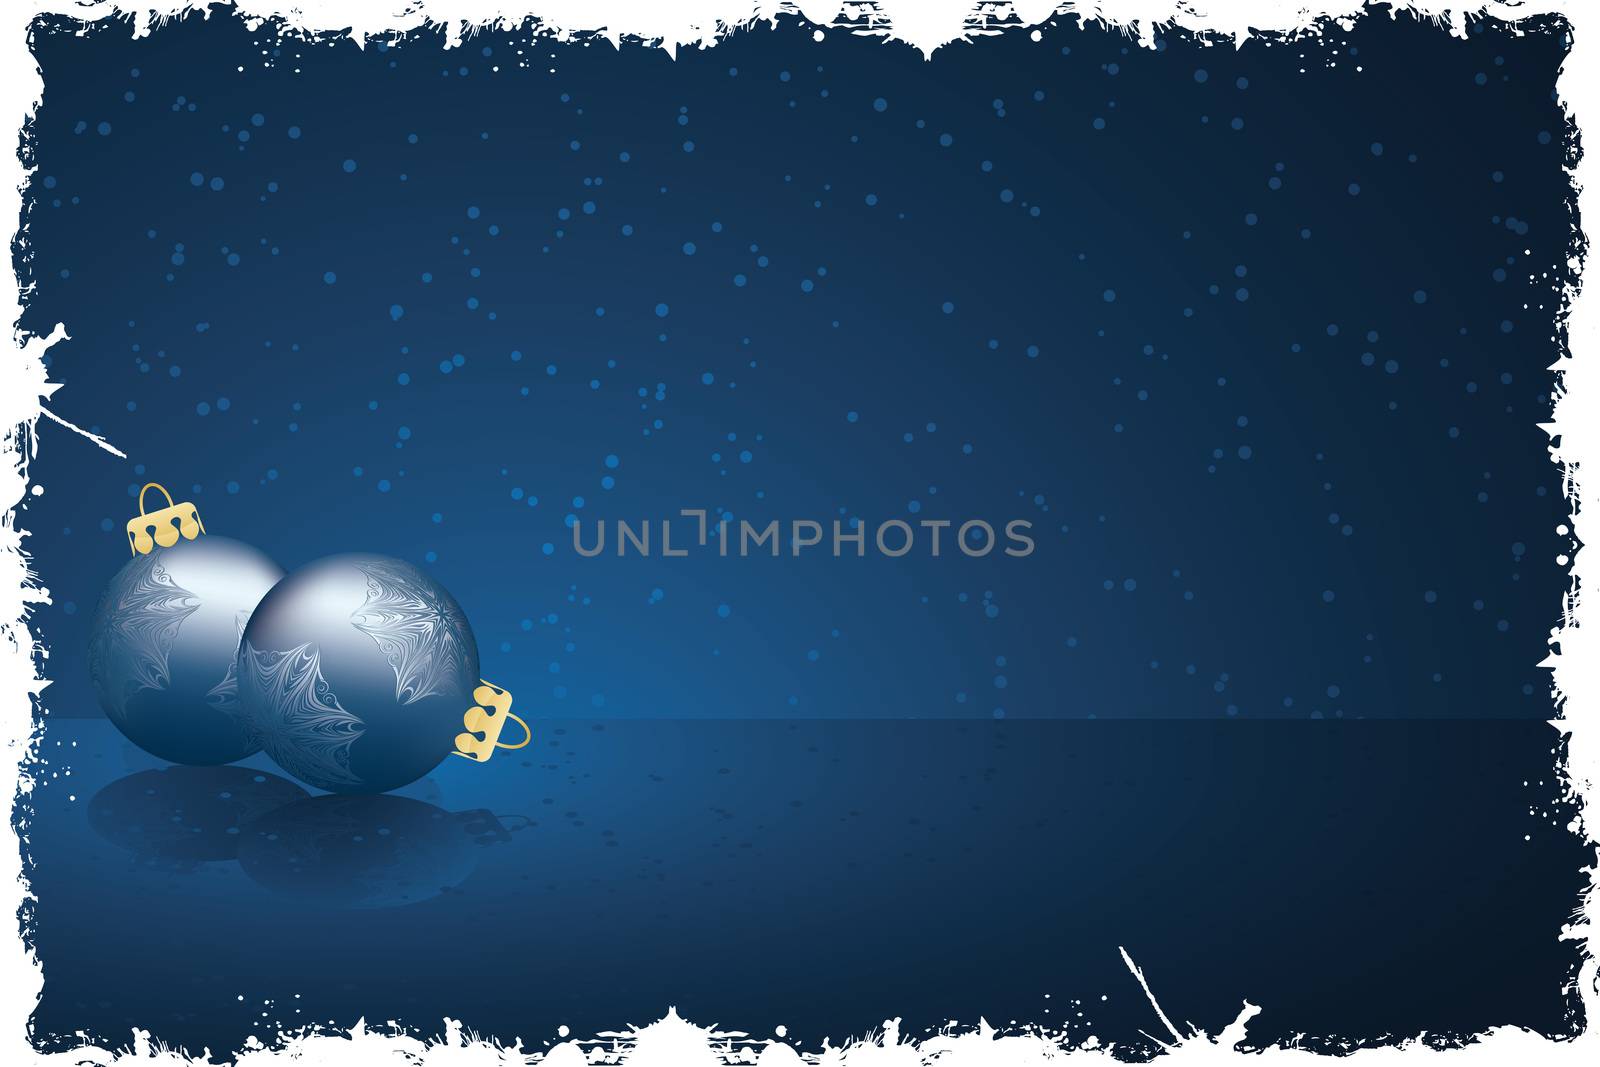 Background with snow and bolls for your design in dark blue colors